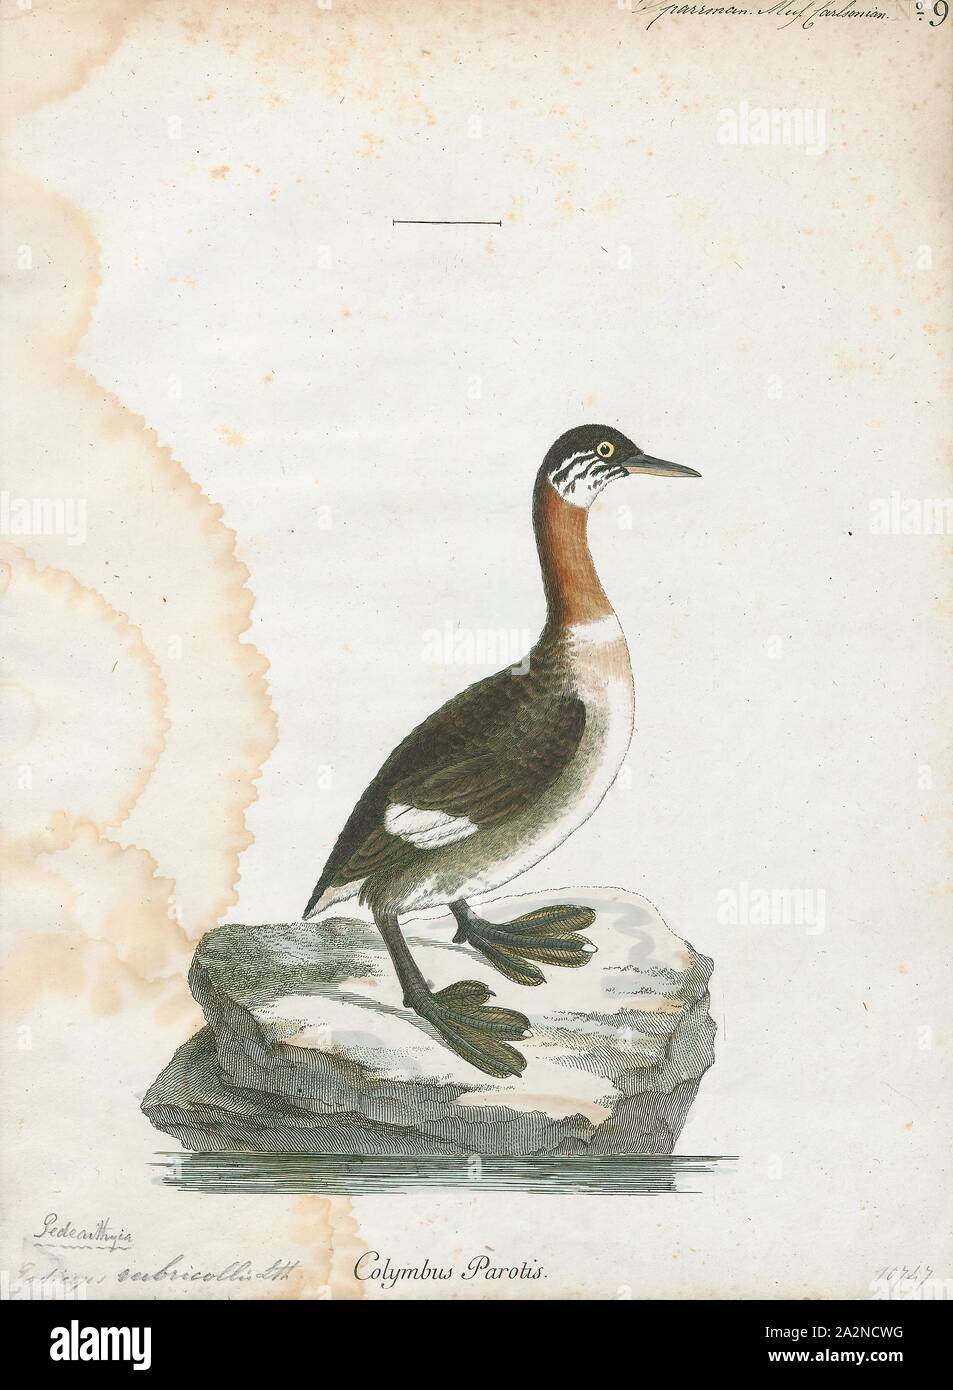 Podiceps grisegena, Print, The red-necked grebe (Podiceps grisegena) is a migratory aquatic bird found in the temperate regions of the northern hemisphere. Its wintering habitat is largely restricted to calm waters just beyond the waves around ocean coasts, although some birds may winter on large lakes. Grebes prefer shallow bodies of fresh water such as lakes, marshes or fish-ponds as breeding sites., 1786-1789 Stock Photo